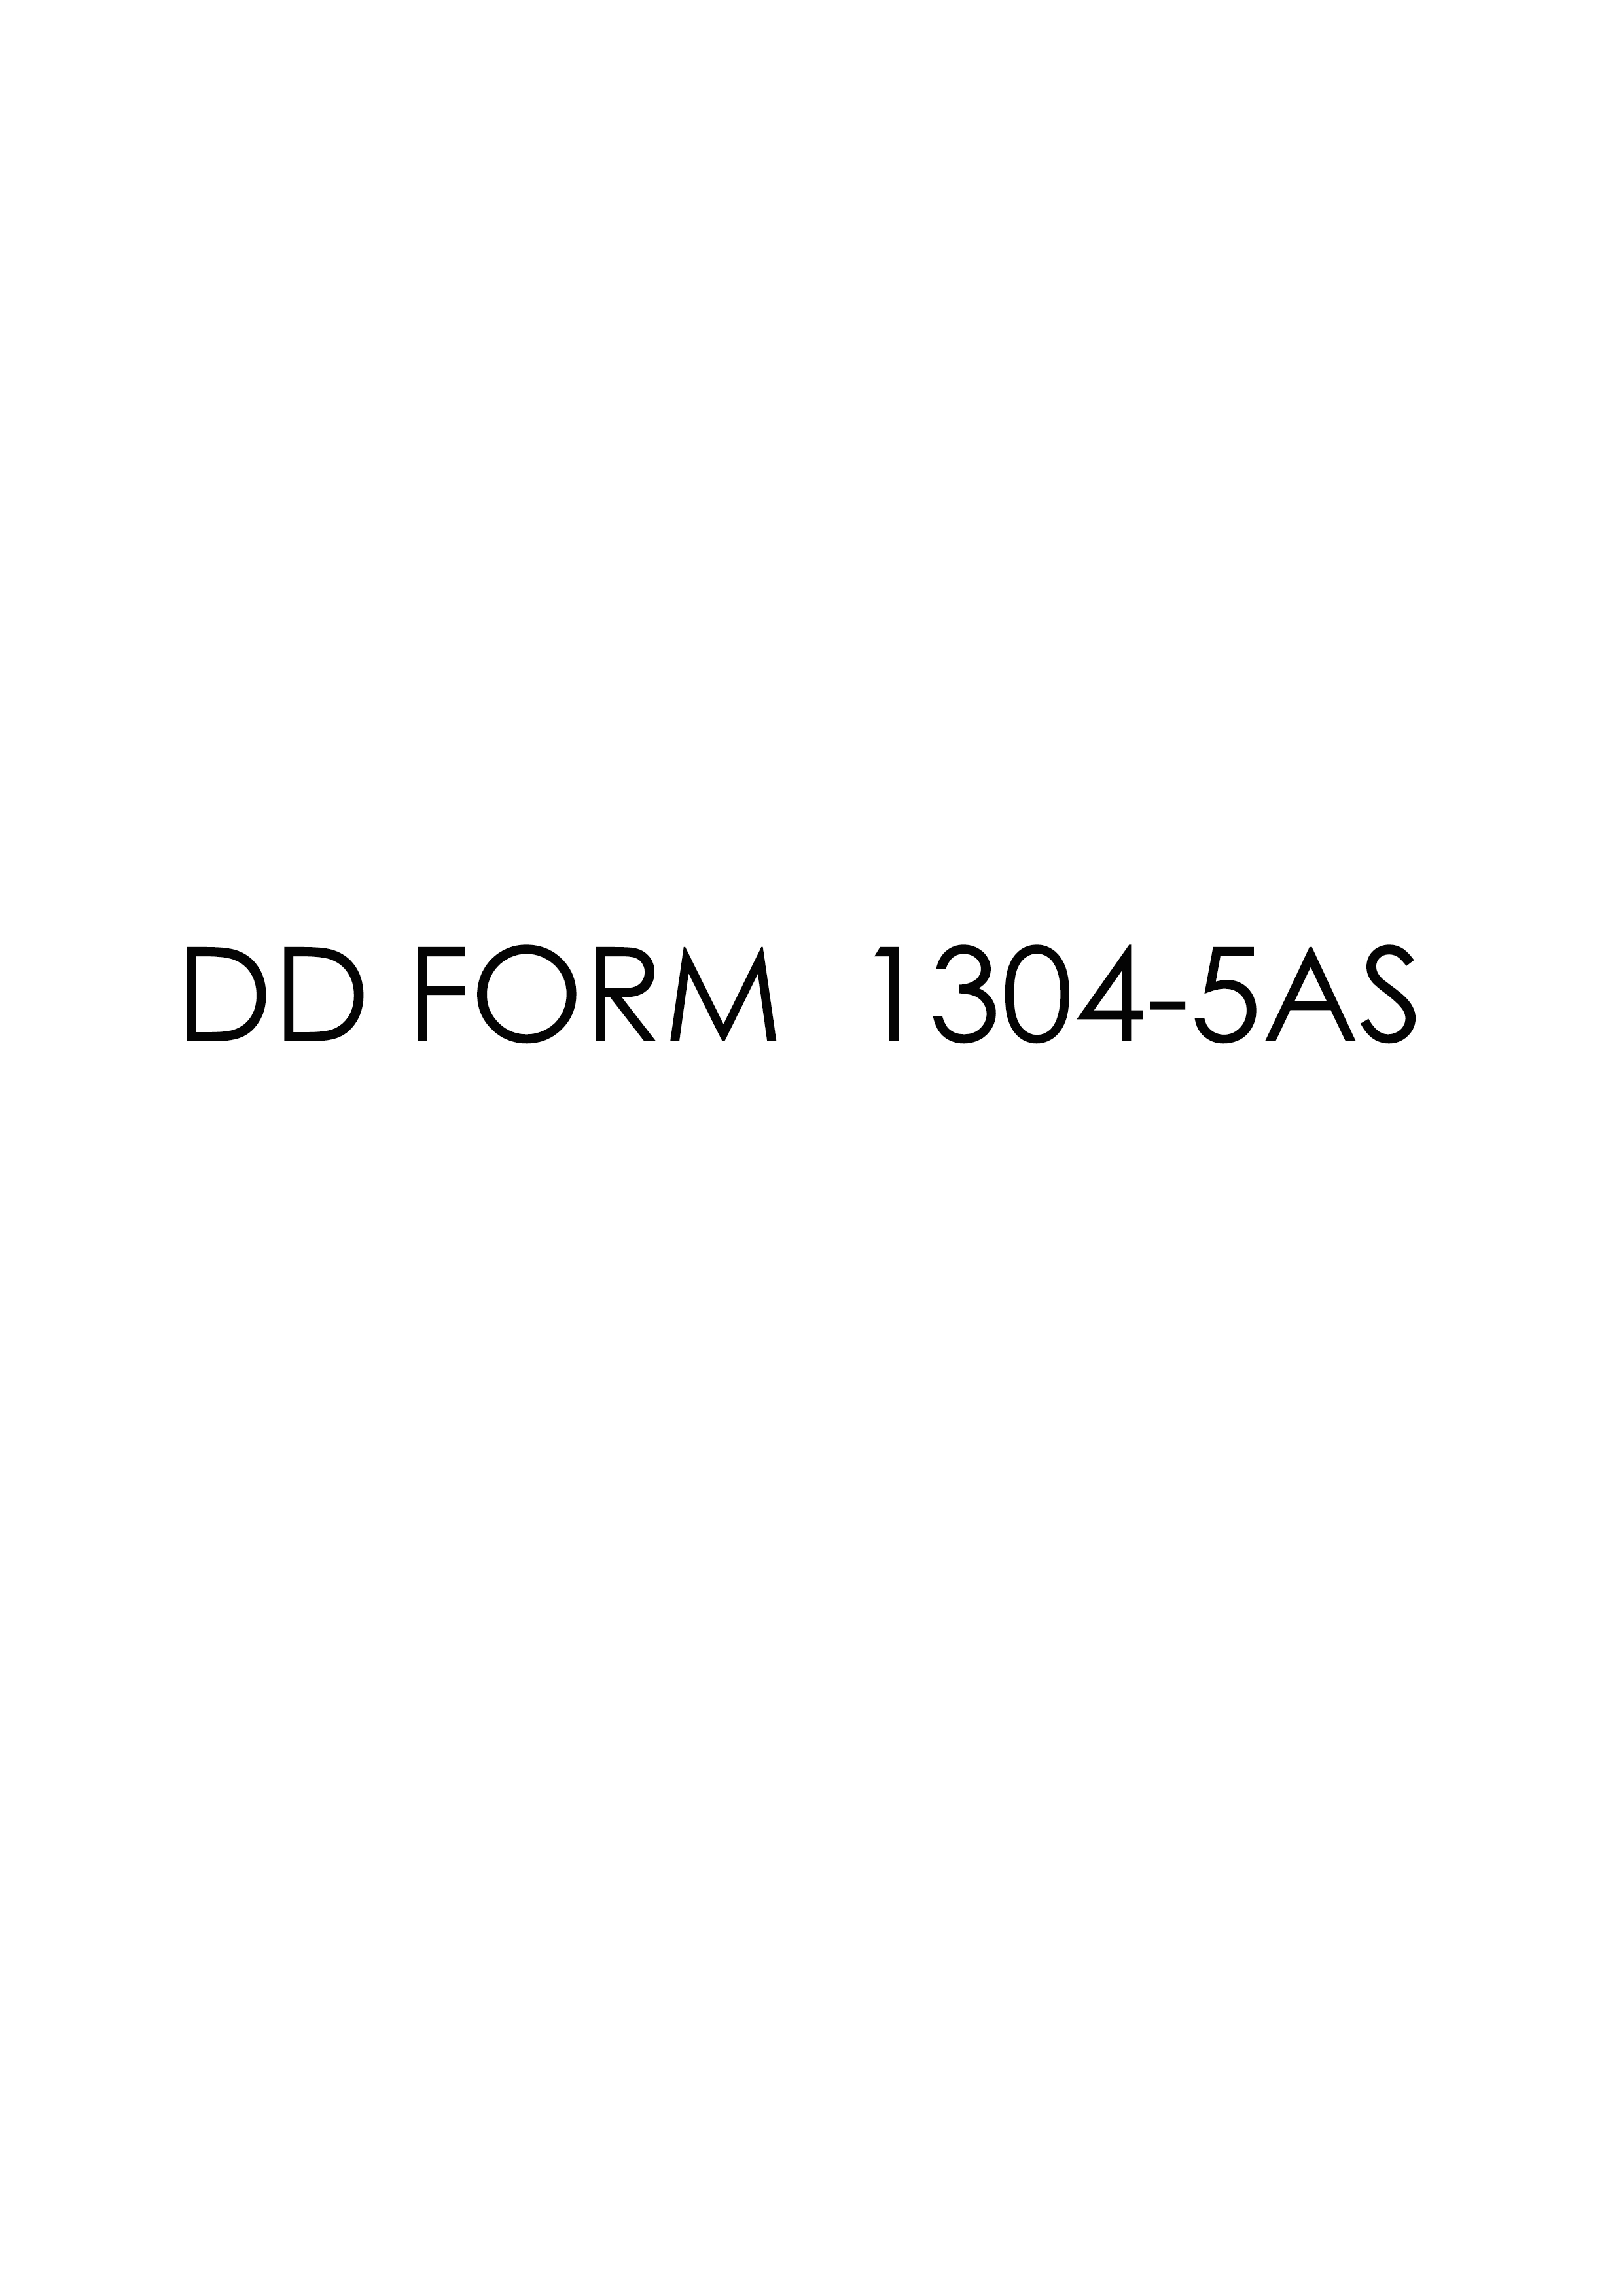 dd Form 1304-5AS fillable